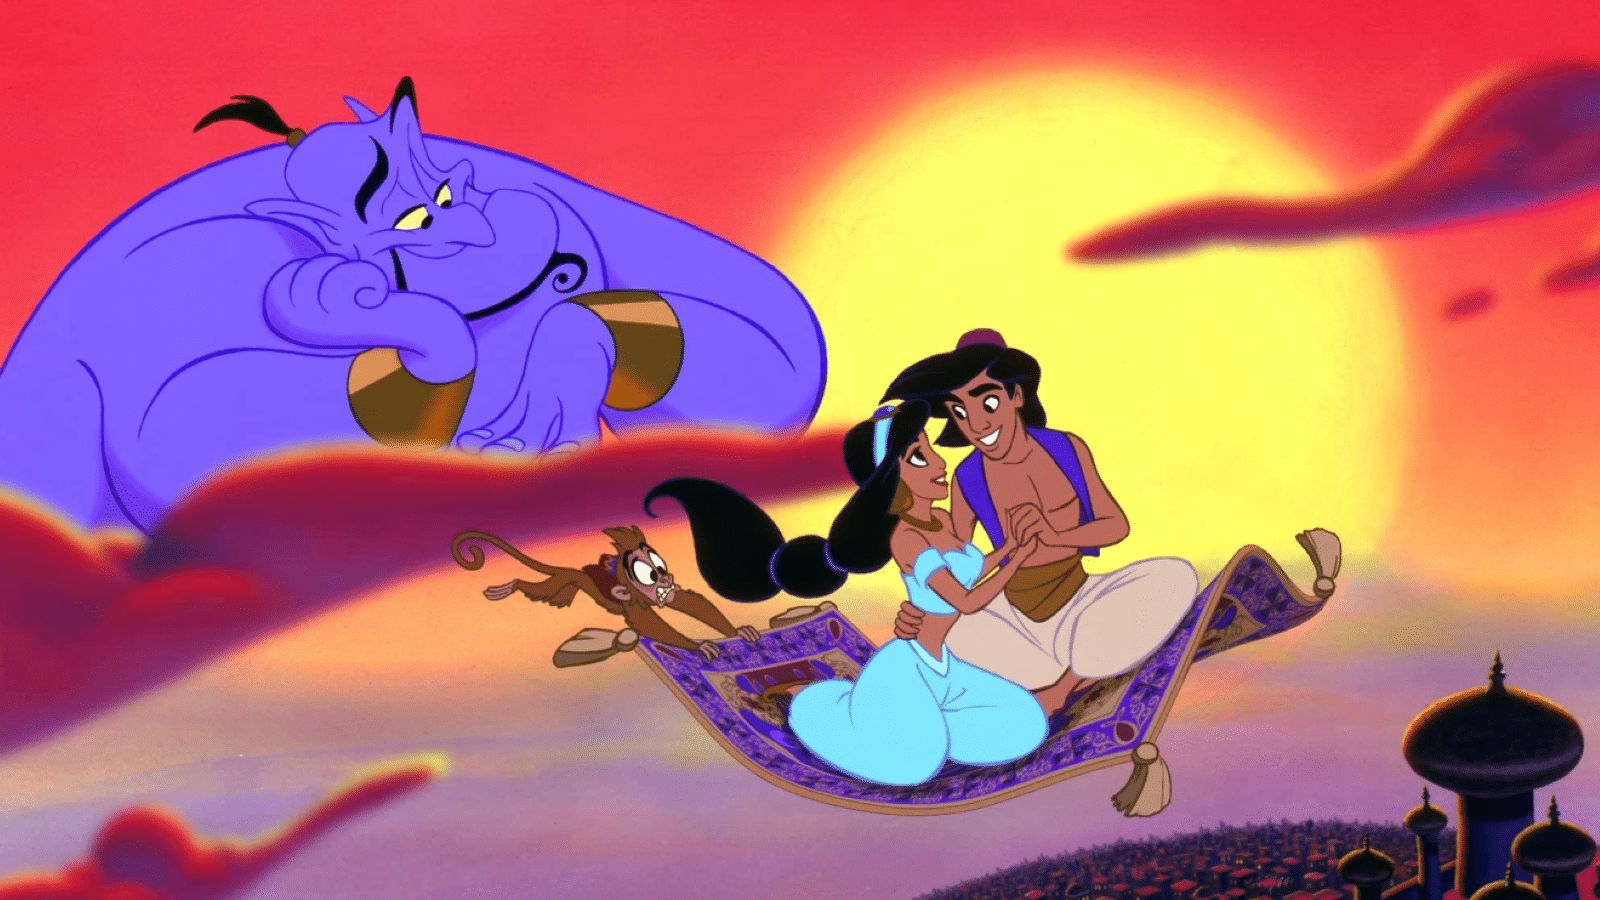 <p>Aladdin is a classic <a href="https://wealthofgeeks.com/12-disney-movies-best-songs/" rel="nofollow noopener">Disney</a> film that folks of all ages can enjoy. The lovable street urchin falls in love with the beautiful princess Jasmine who's out of his league. To keep her love, he must face the evil Sultan Jafar. Aside from the beautiful story, the catchy songs make the film a masterpiece.</p>